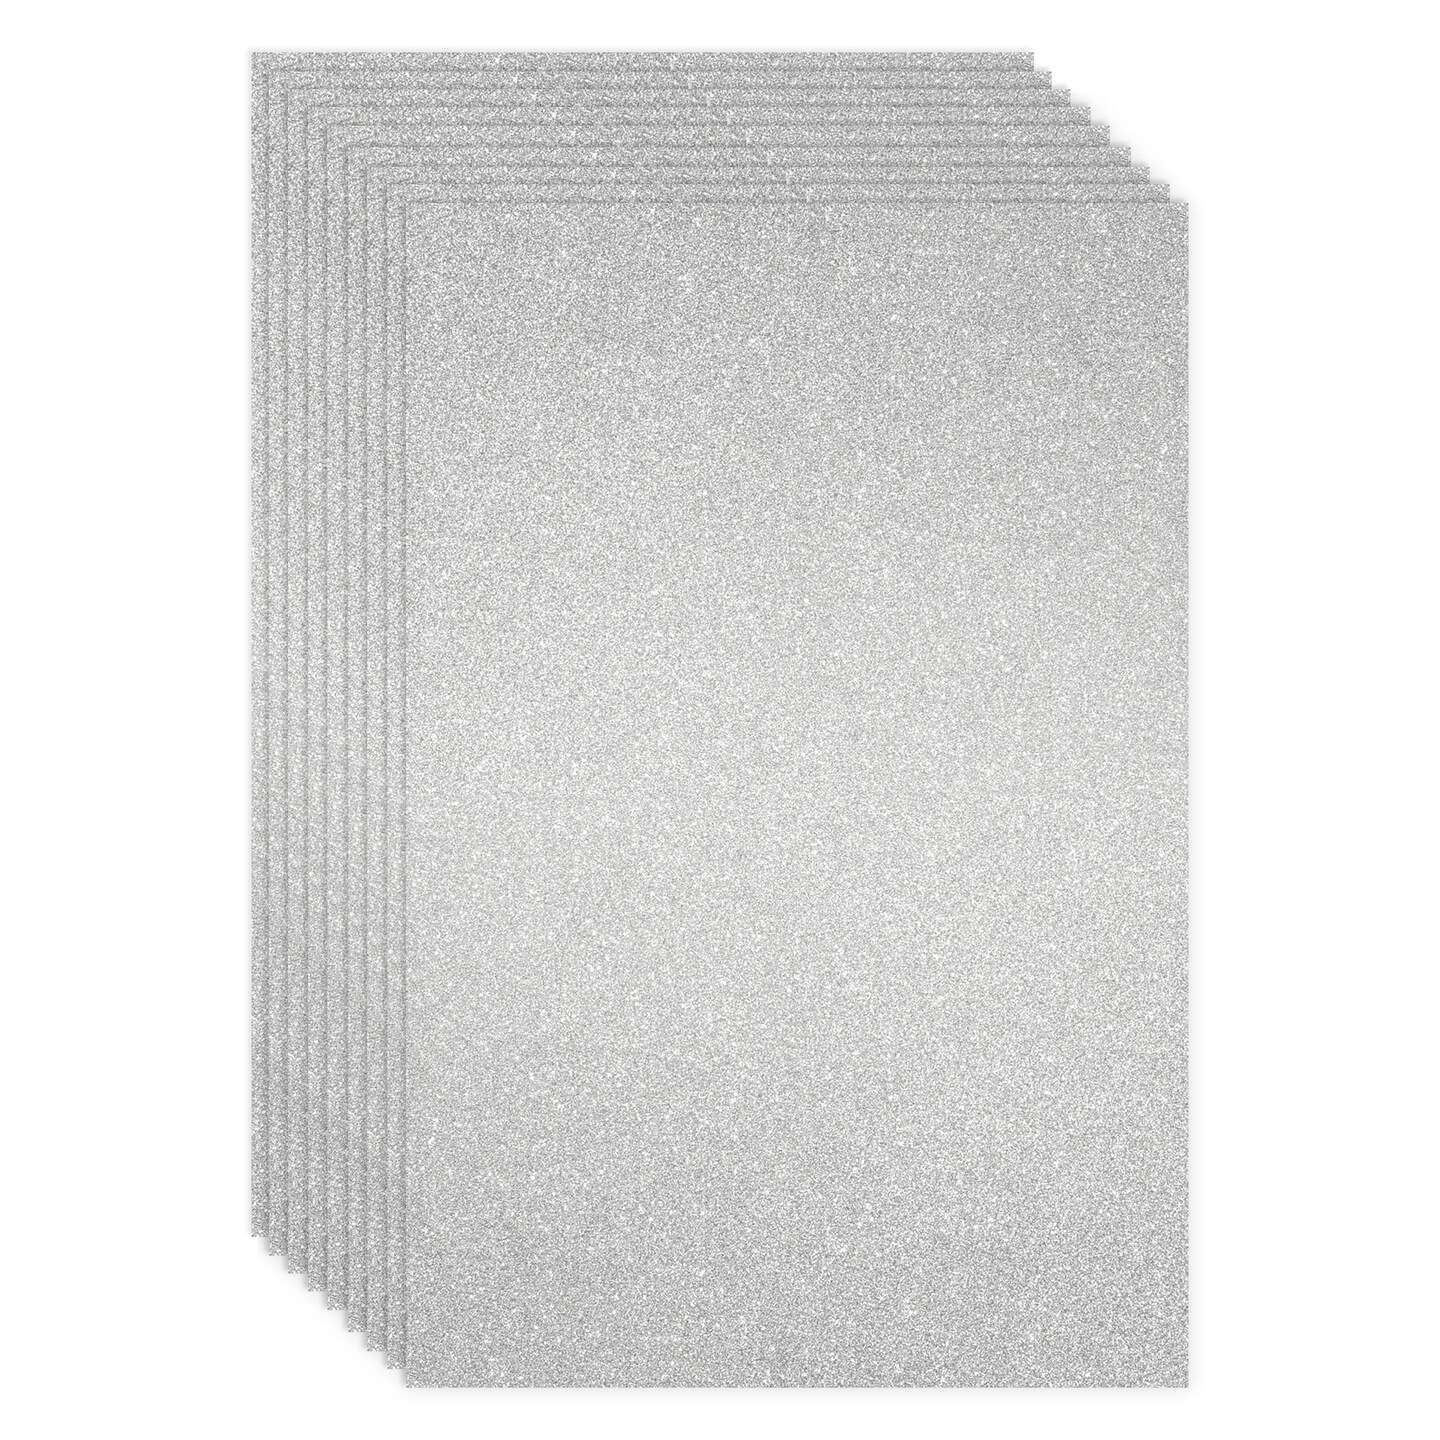 24 Sheets Silver Glitter Cardstock Paper for Scrapbooking, Arts